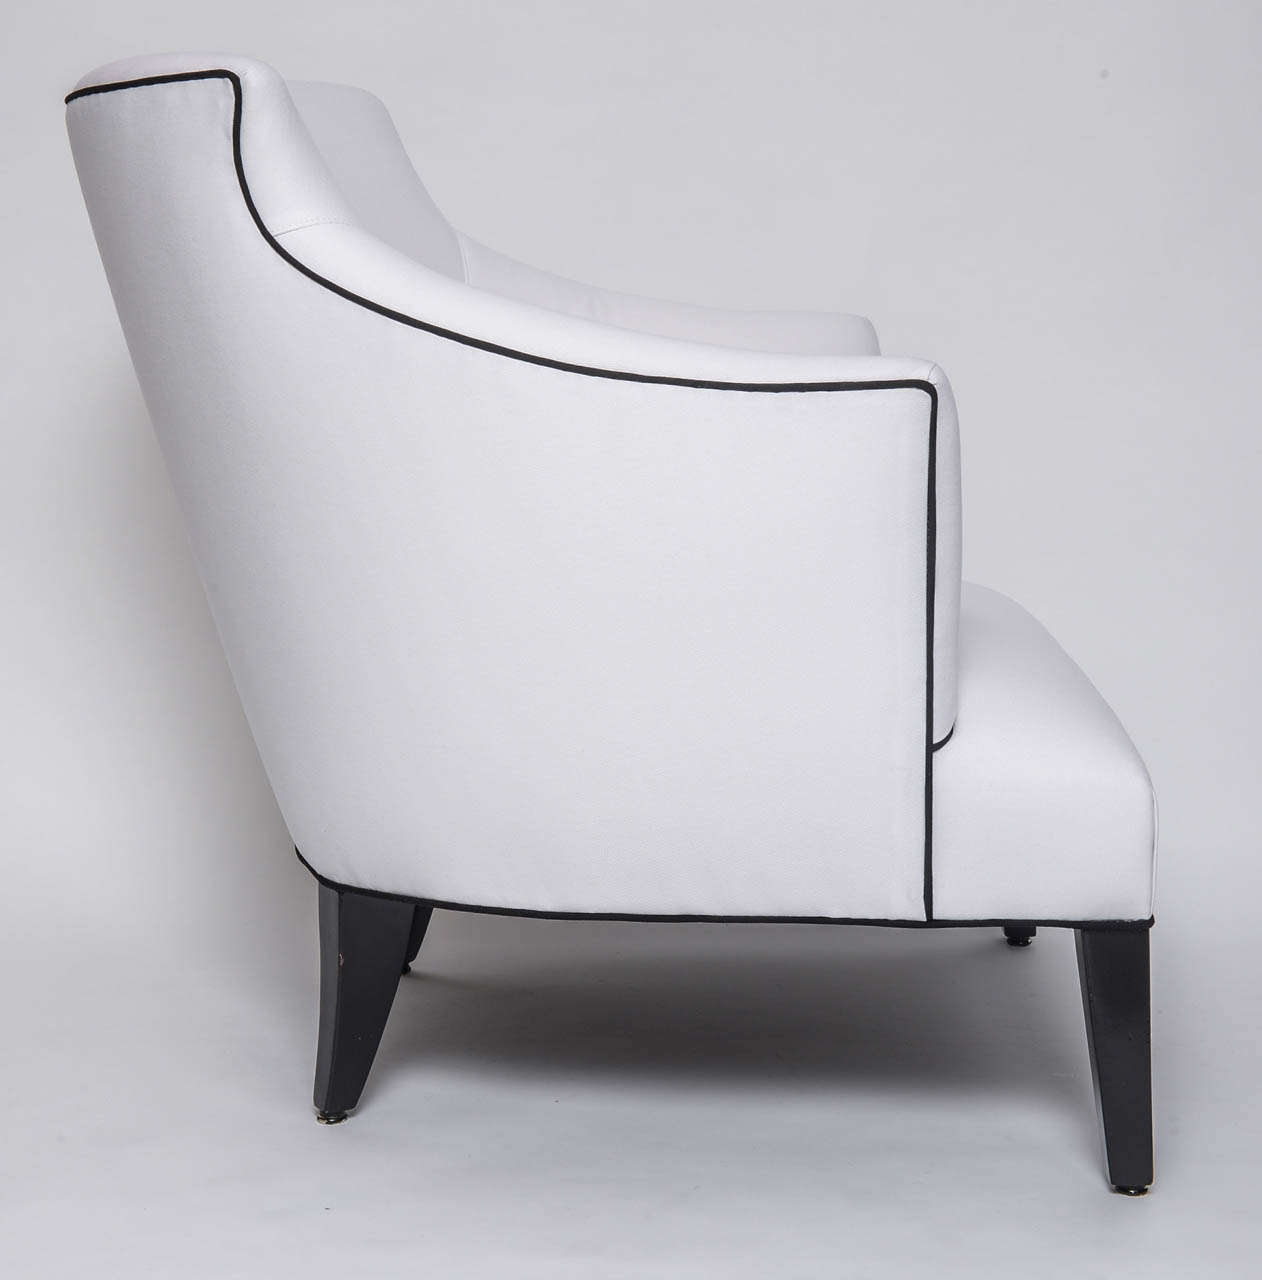 Contemporary SALE! SALE! SALE!  STUDIO BUILT WHITE CHAIR BY SUSANER. floor sample as is For Sale